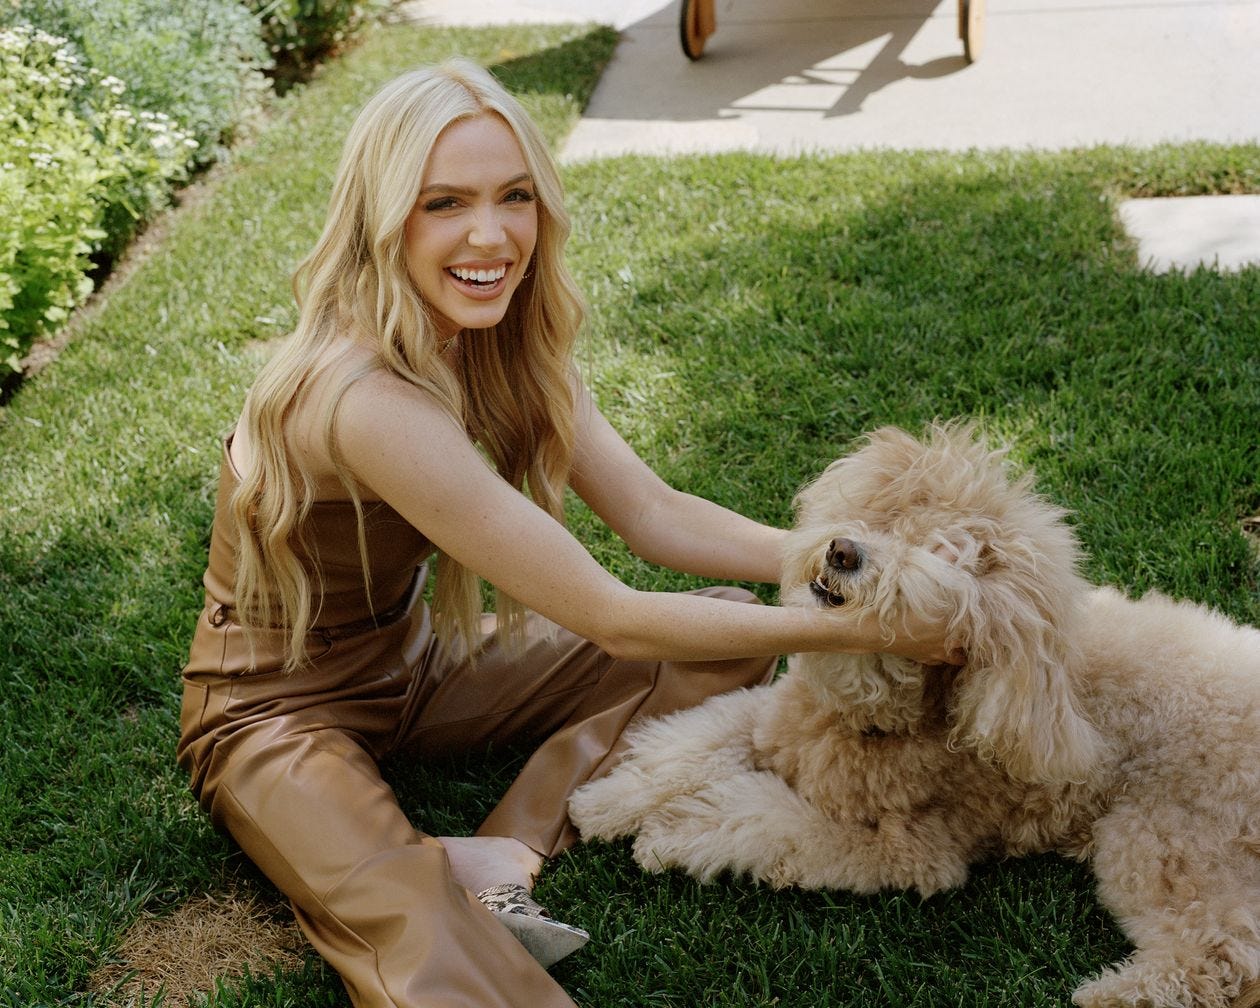 Picture of Alex Cooper, blond and smiling in brown leather pants and a leather tube top (?) sitting on a green lawn and scritching a very fluffy pup.